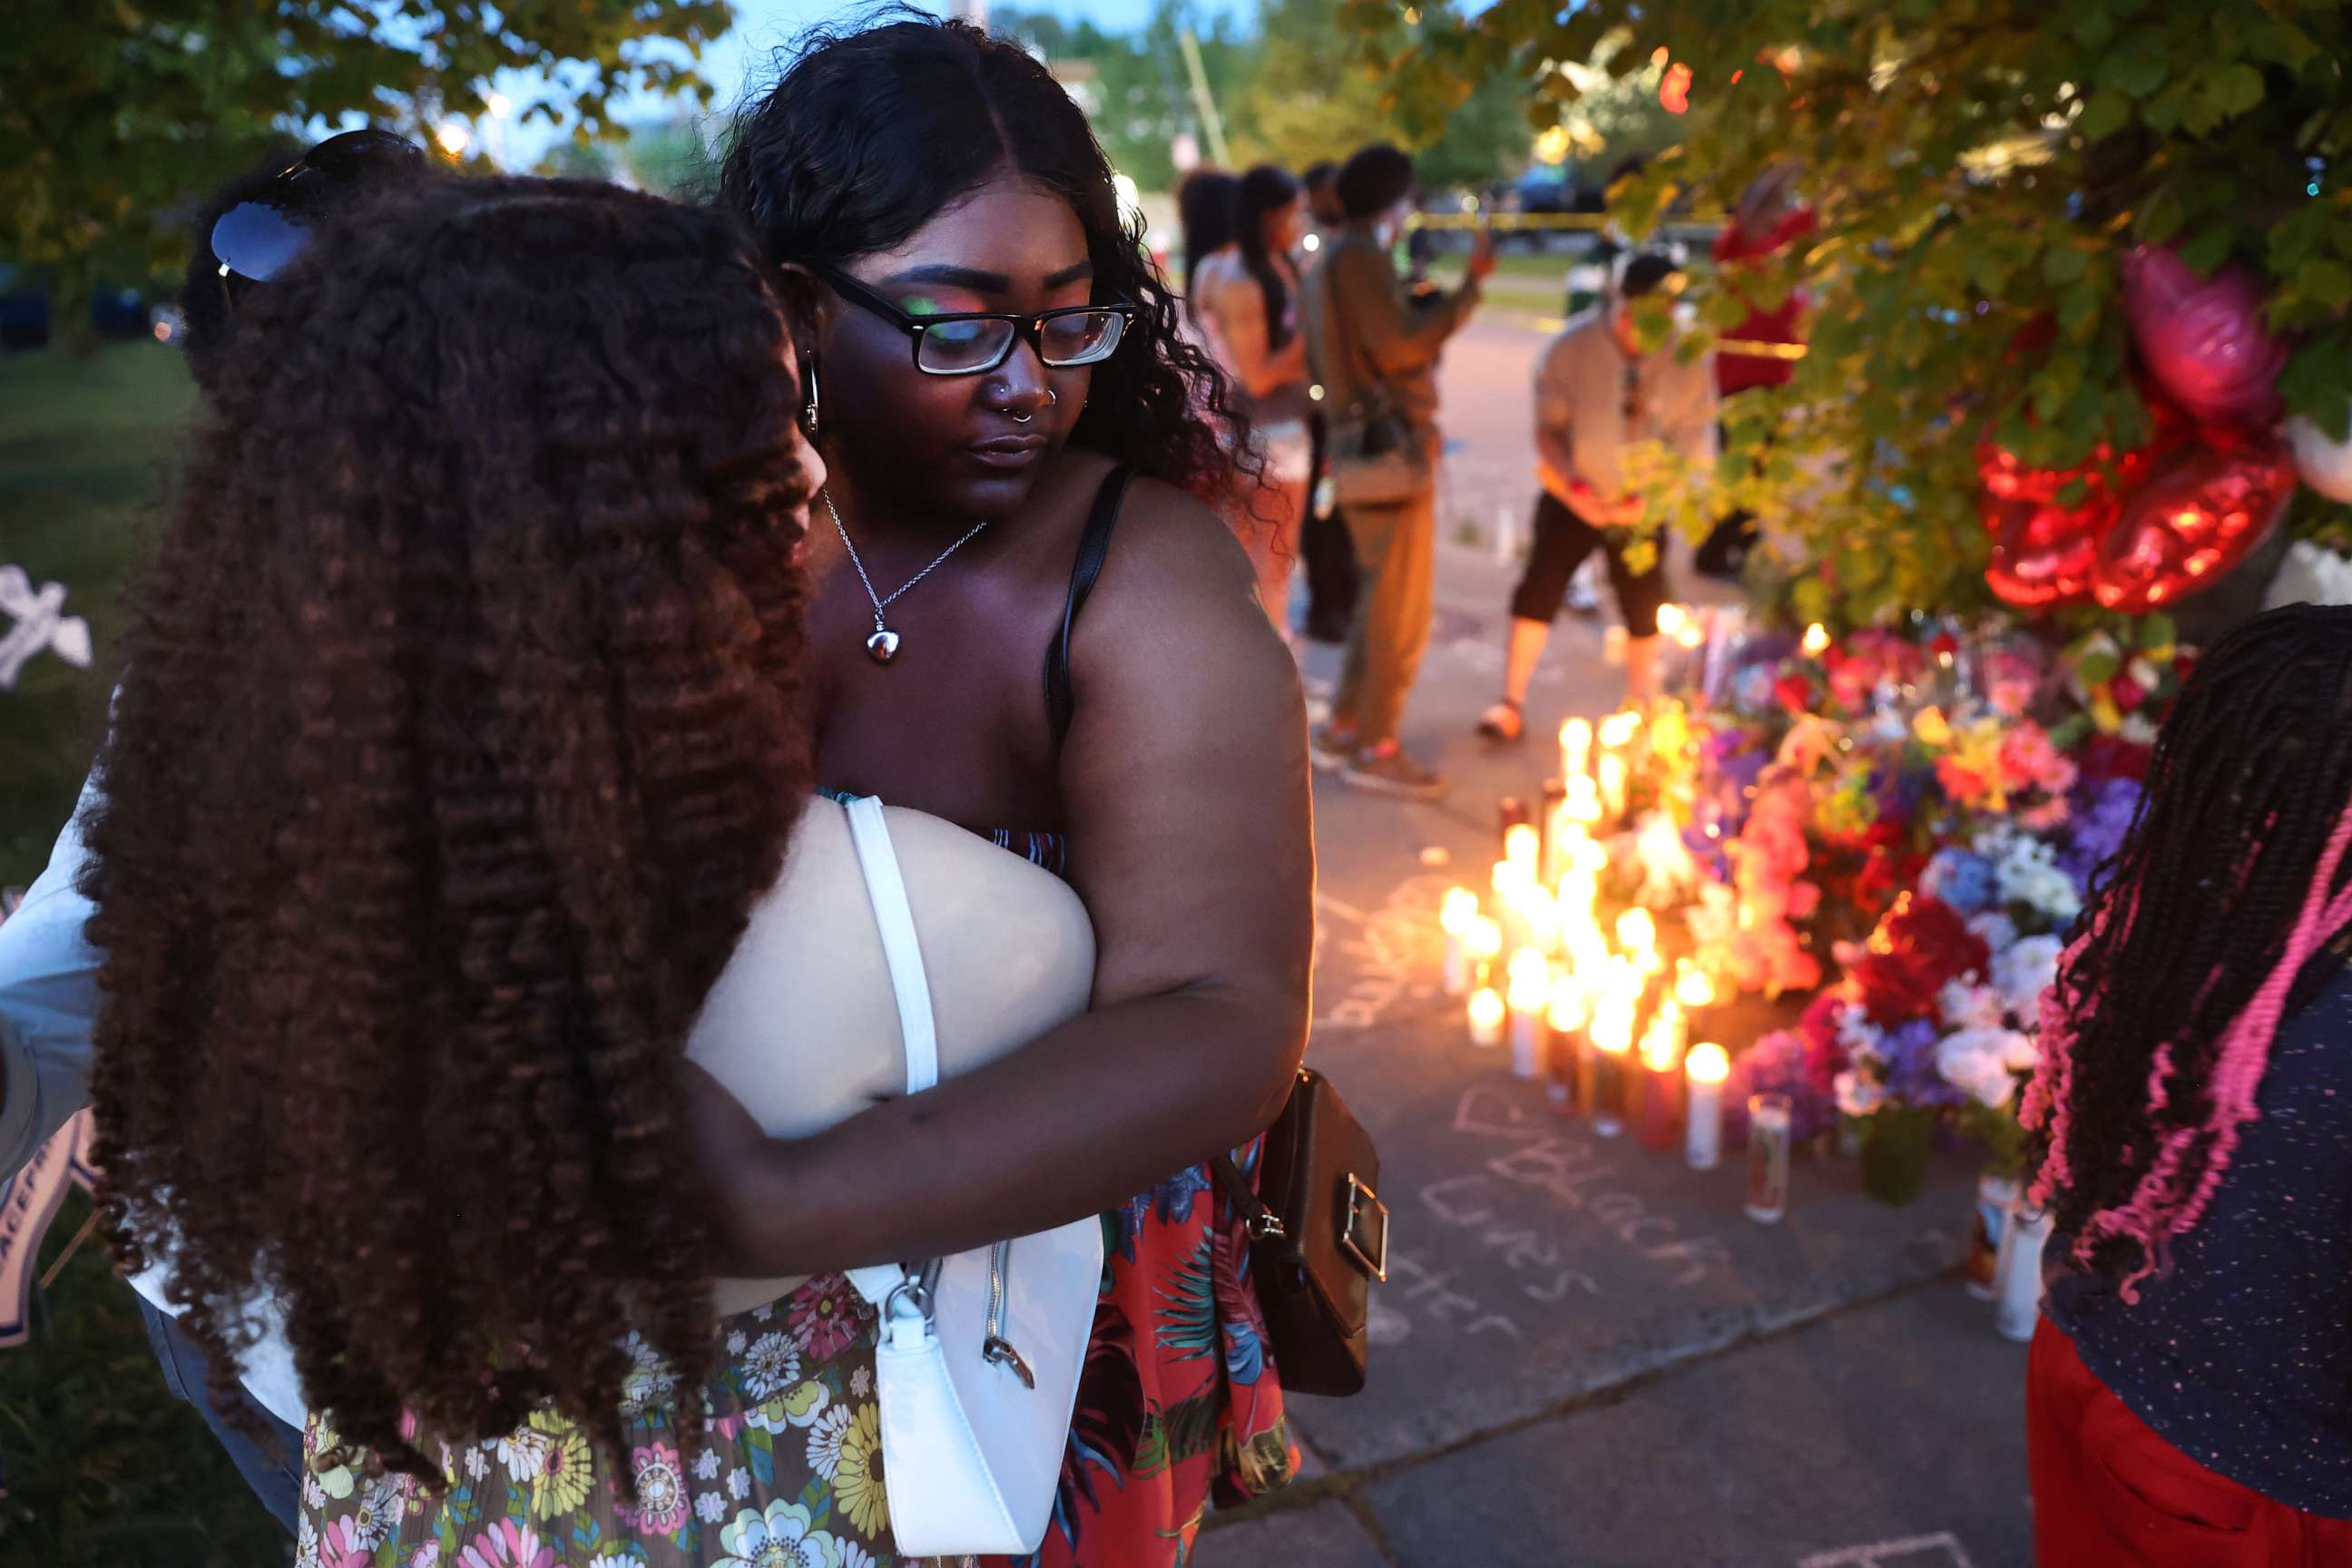 PHOTO: Mourners support each other while visiting a makeshift memorial outside of Tops market, May 15, 2022 in Buffalo, New York.